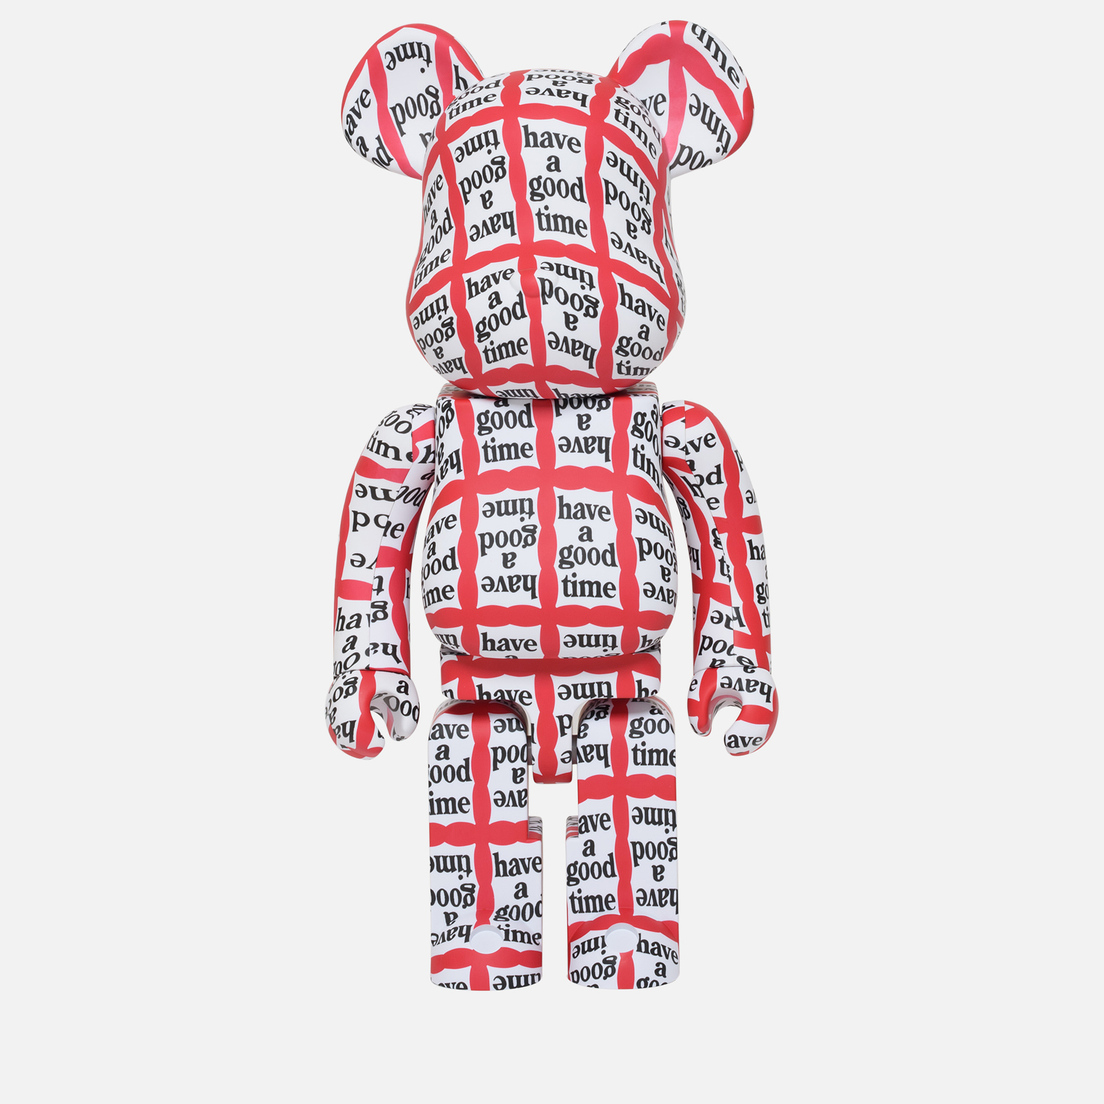 Medicom Toy Игрушка Bearbrick Have A Good Time 1000%